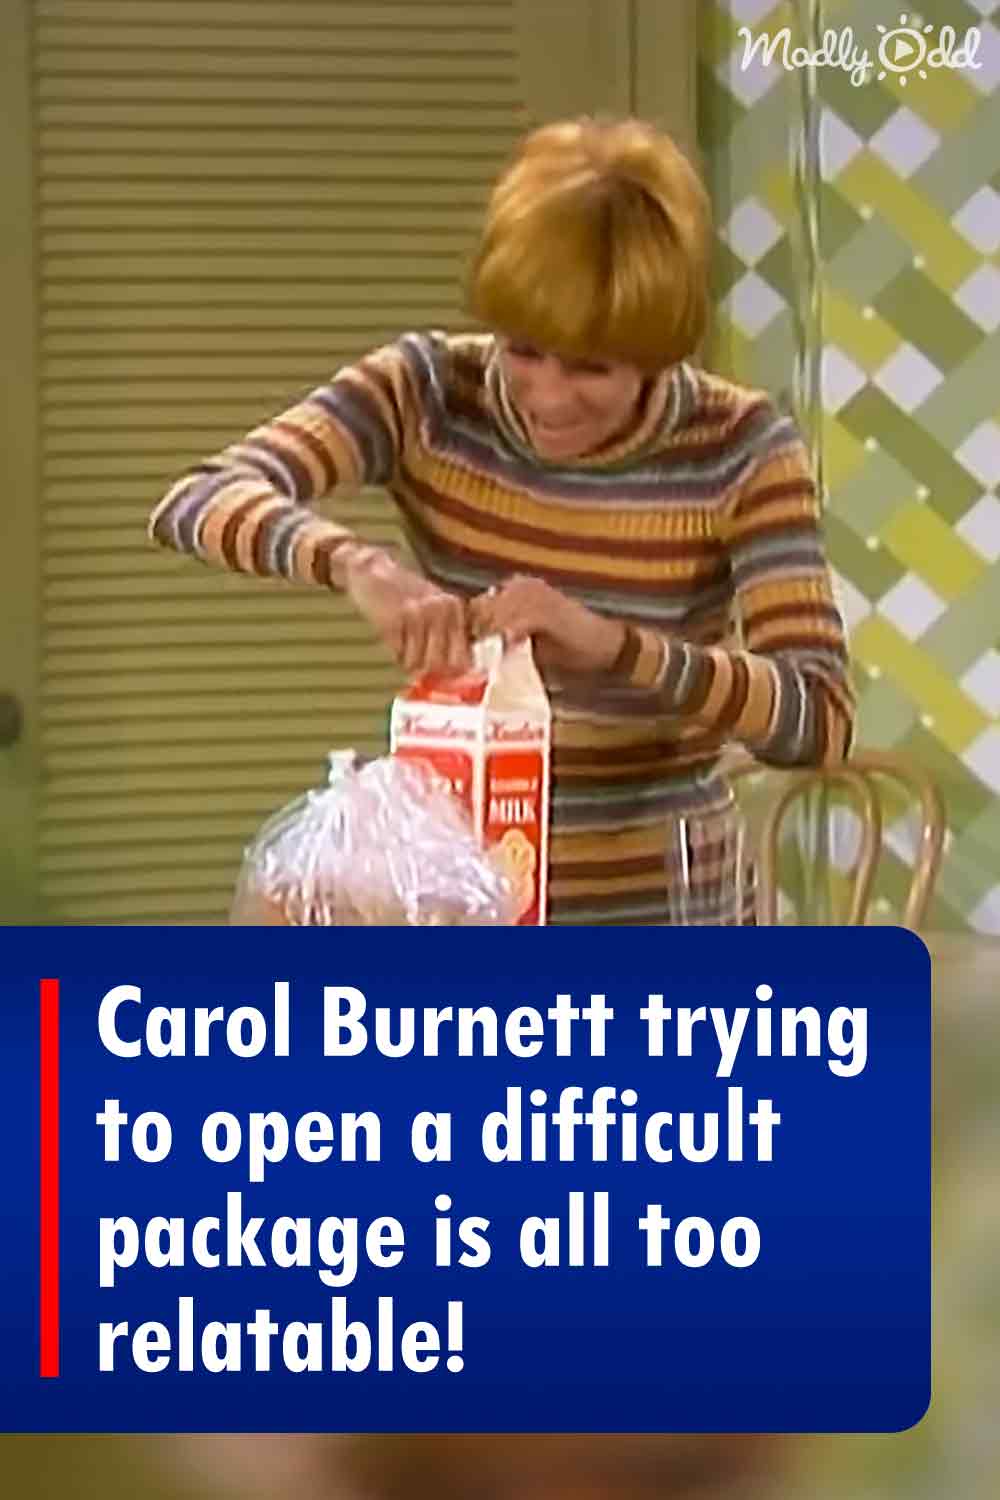 Carol Burnett trying to open a difficult package is all too relatable!